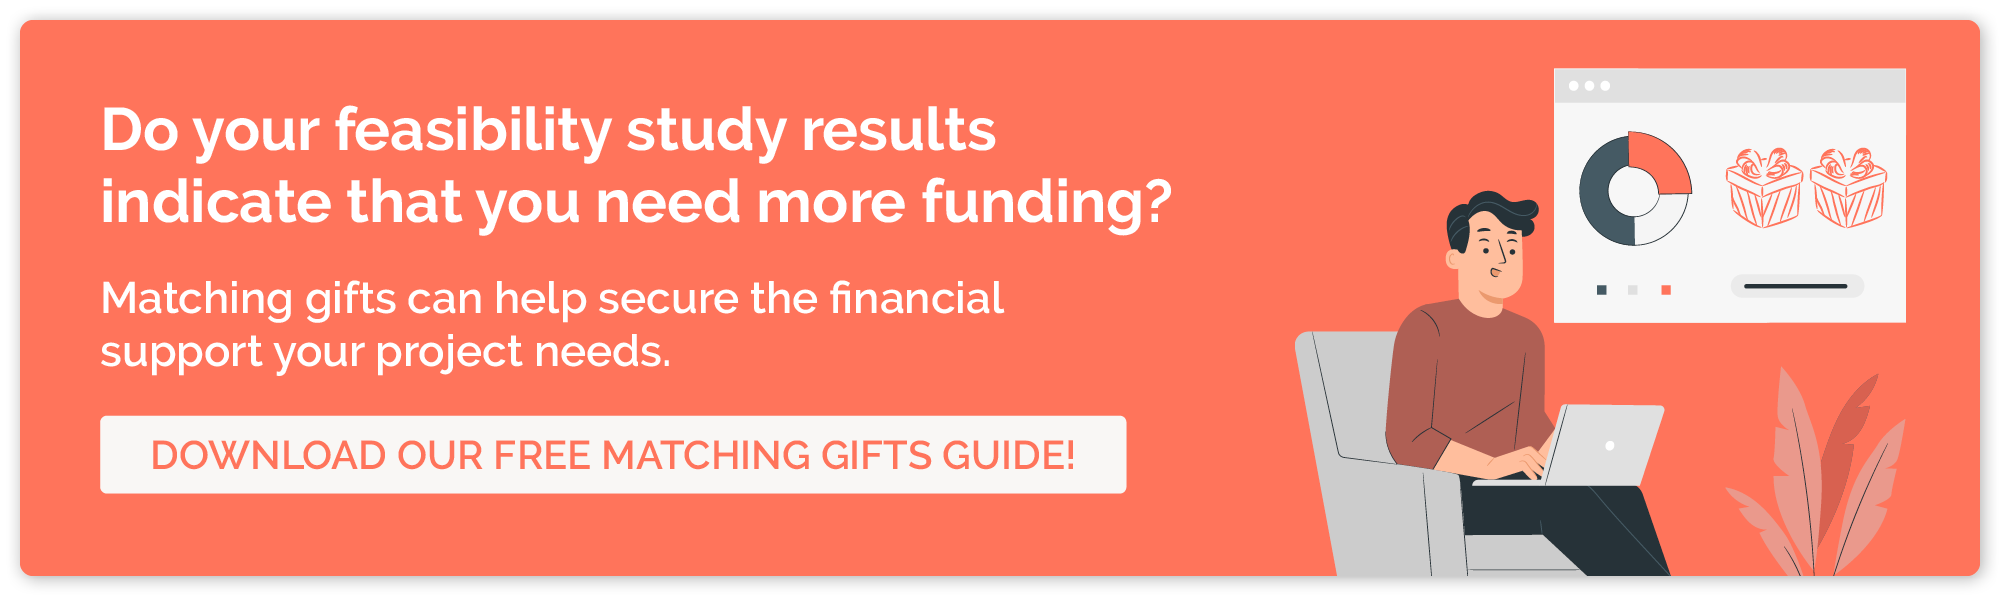 If your feasibility study found that you need more funding for your project, download our matching gifts guide, so you can learn how to boost revenue quickly.